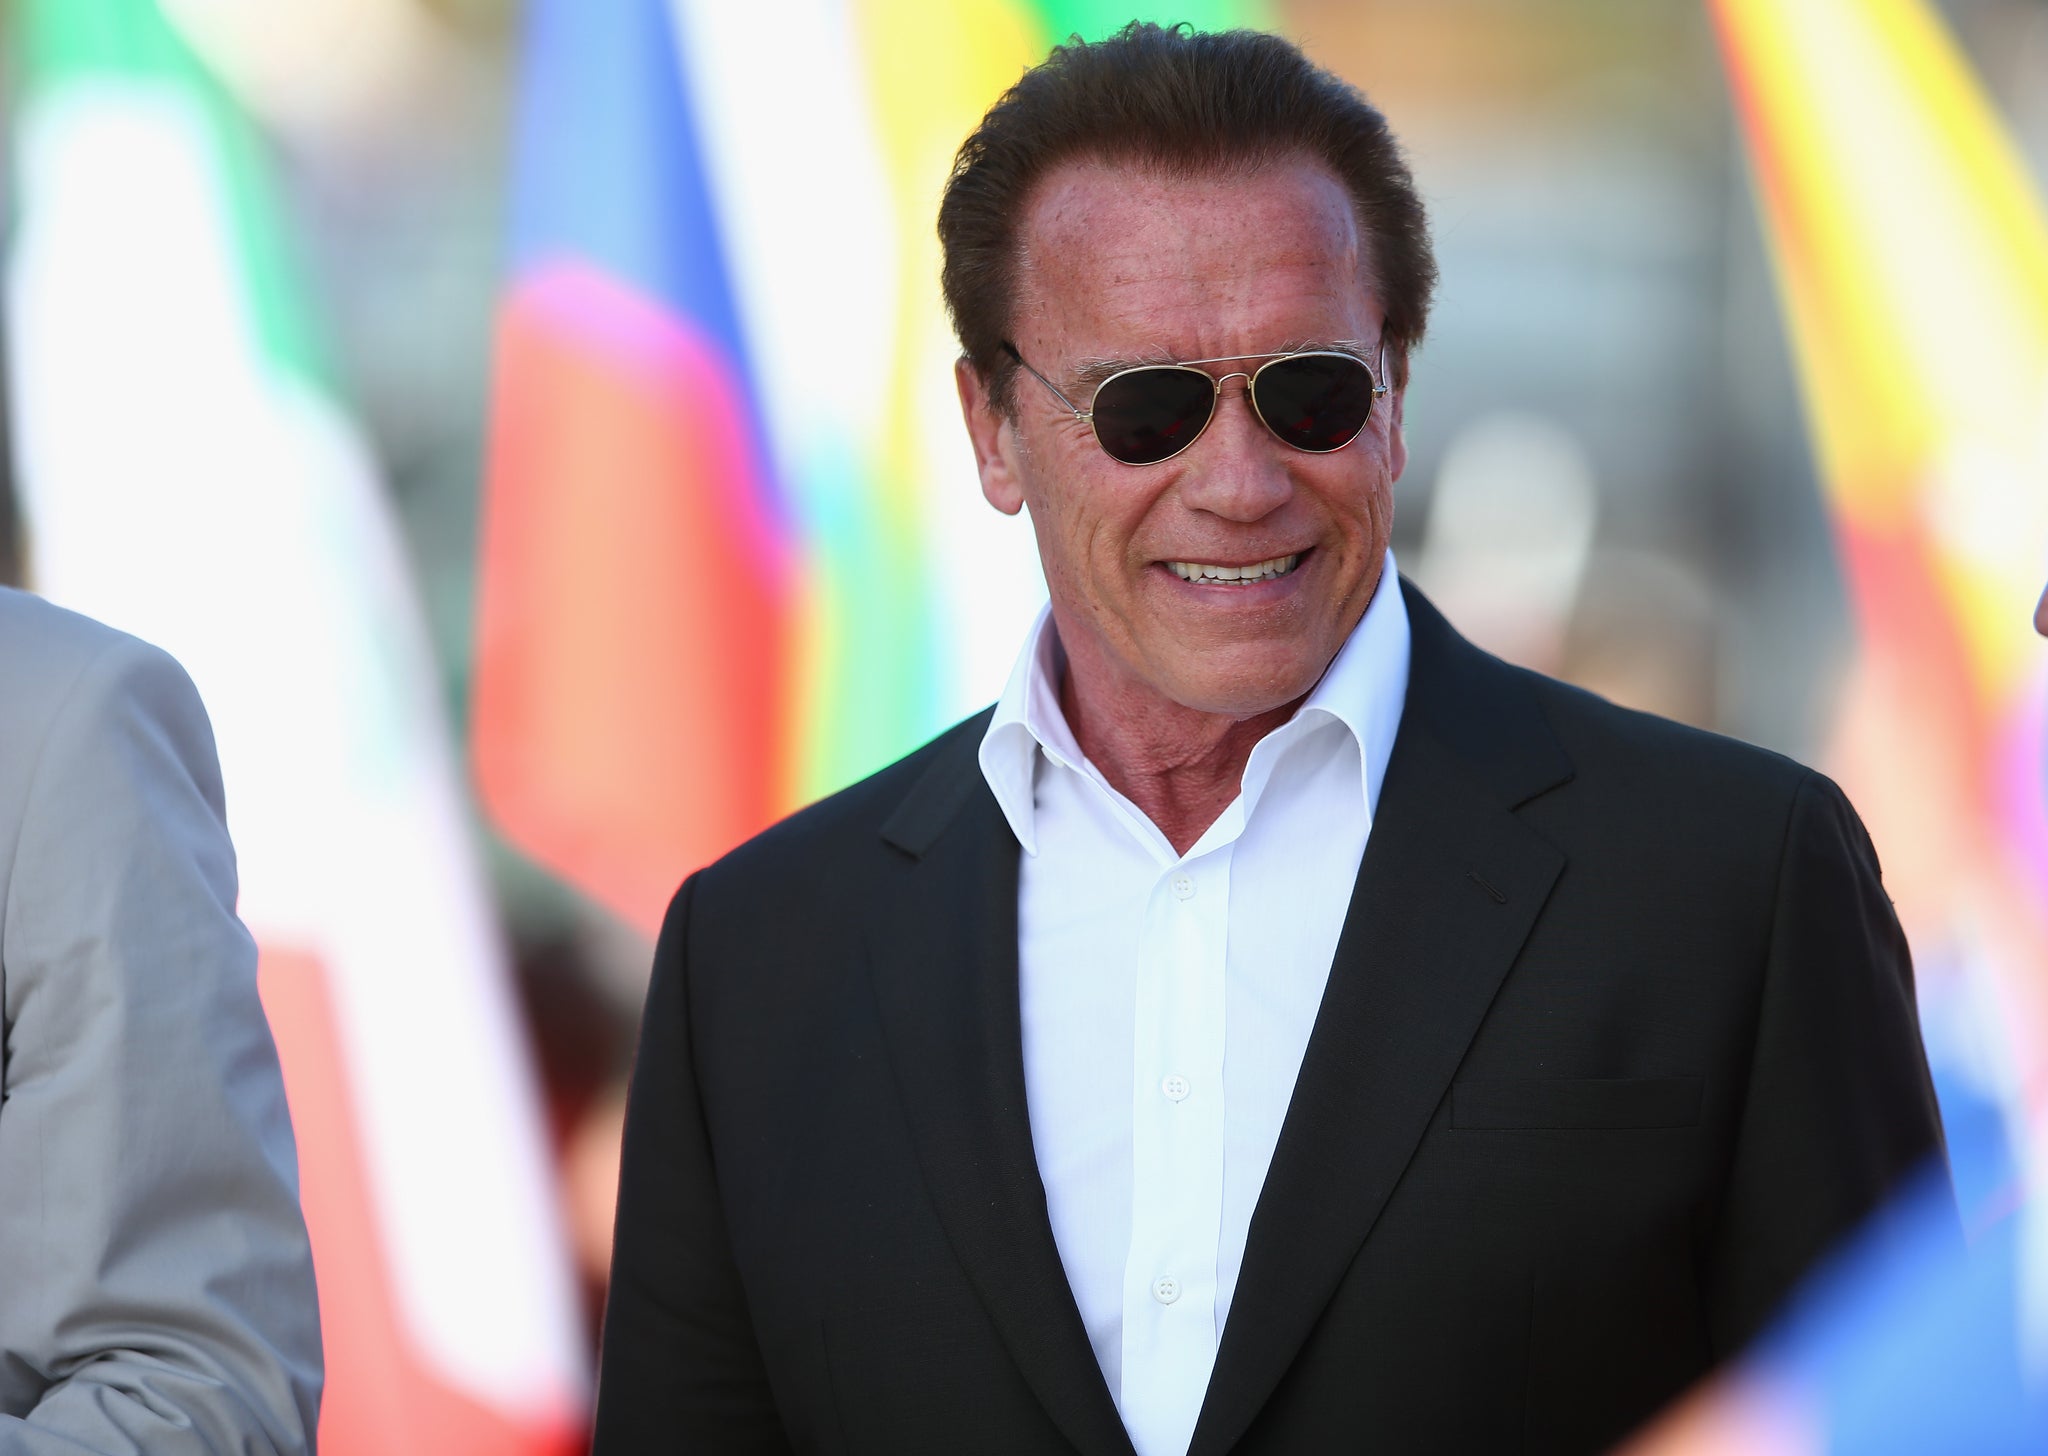 Arnold Schwarzenegger certainly didn't waste his breath when it came to airing his views on the fourth Terminator film